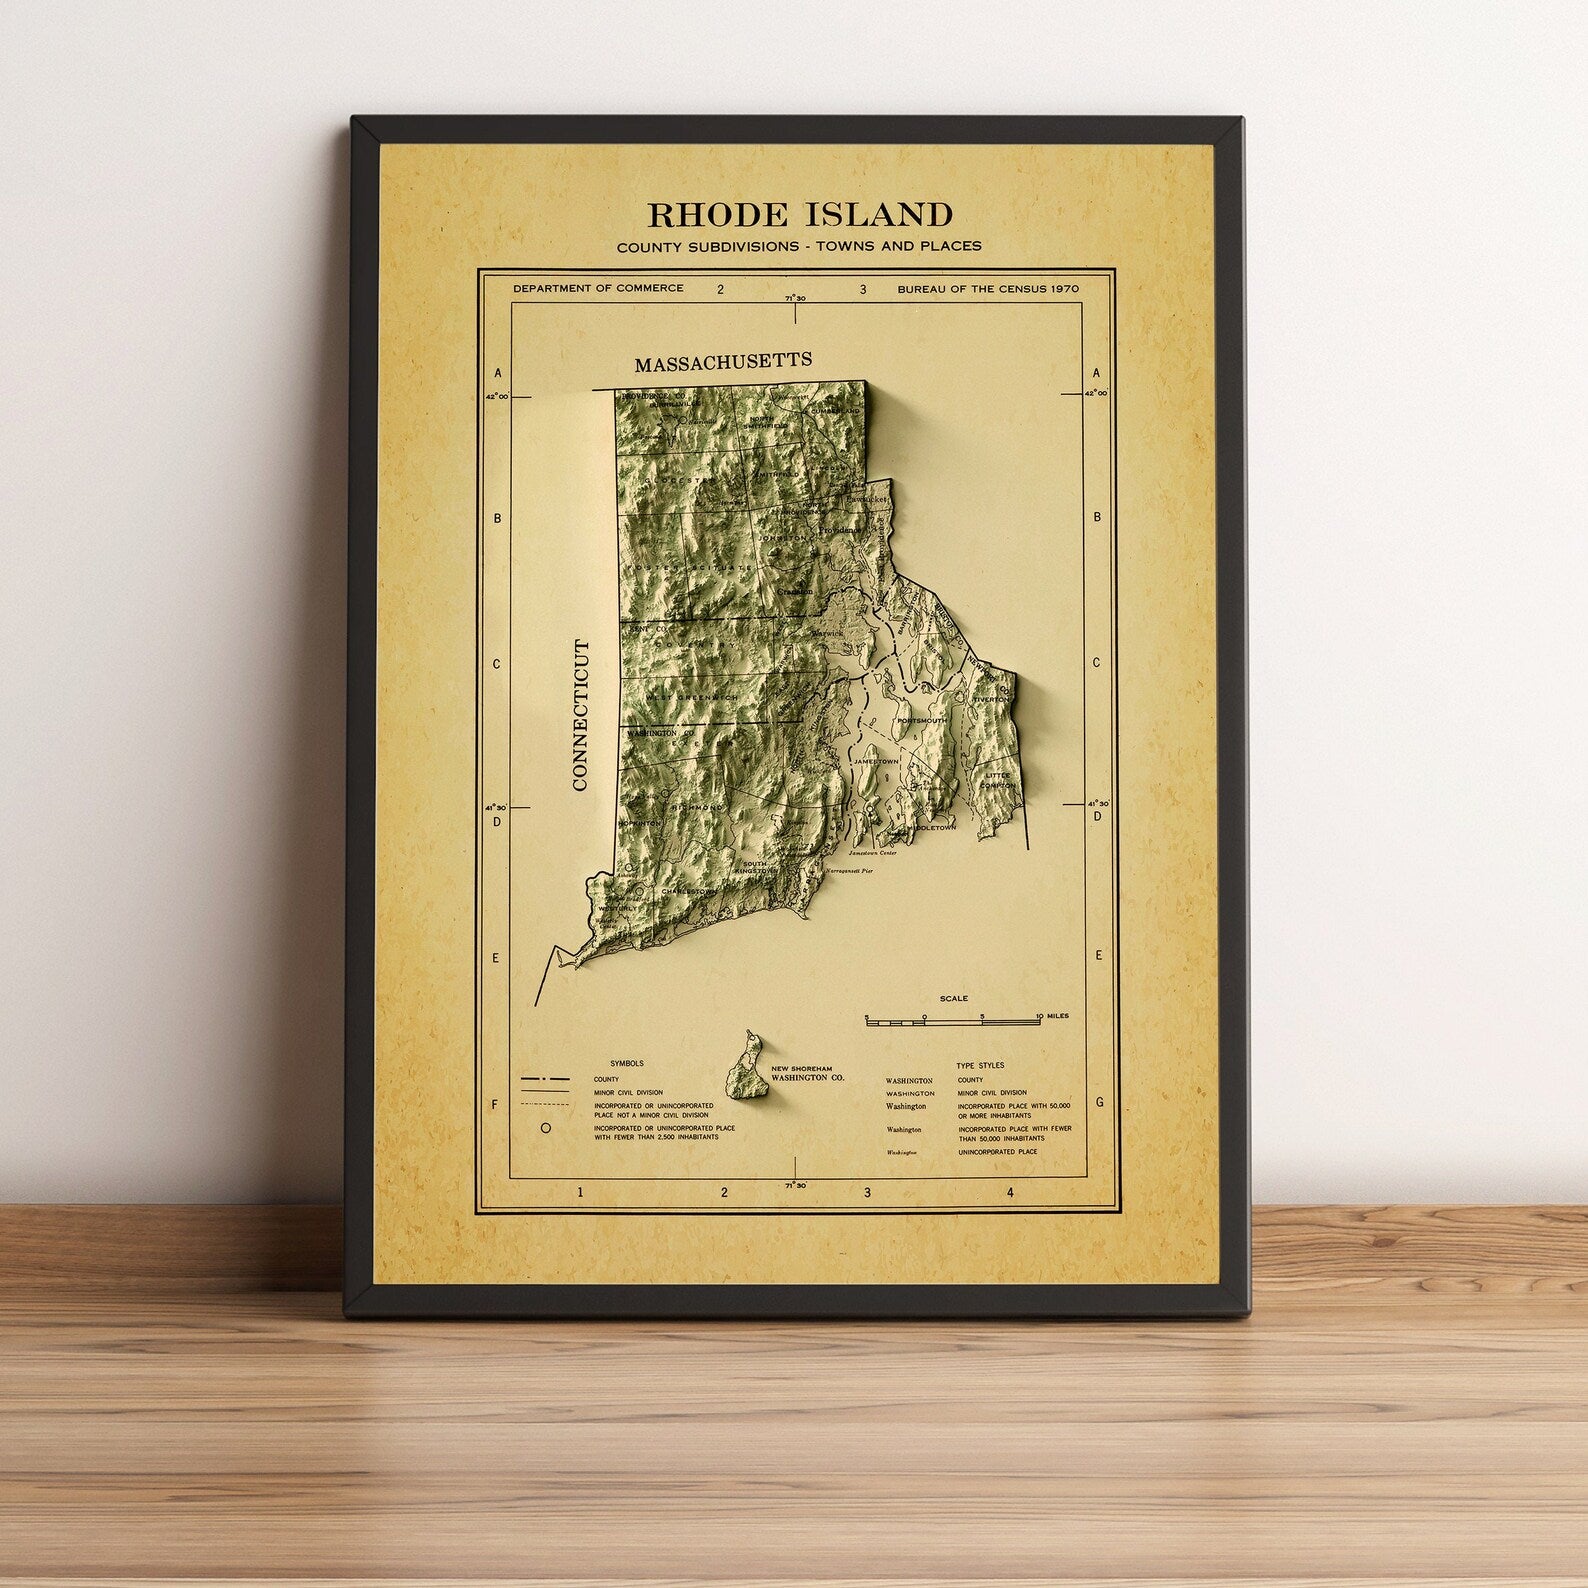 Image showing a vintage relief map of Rhode Island